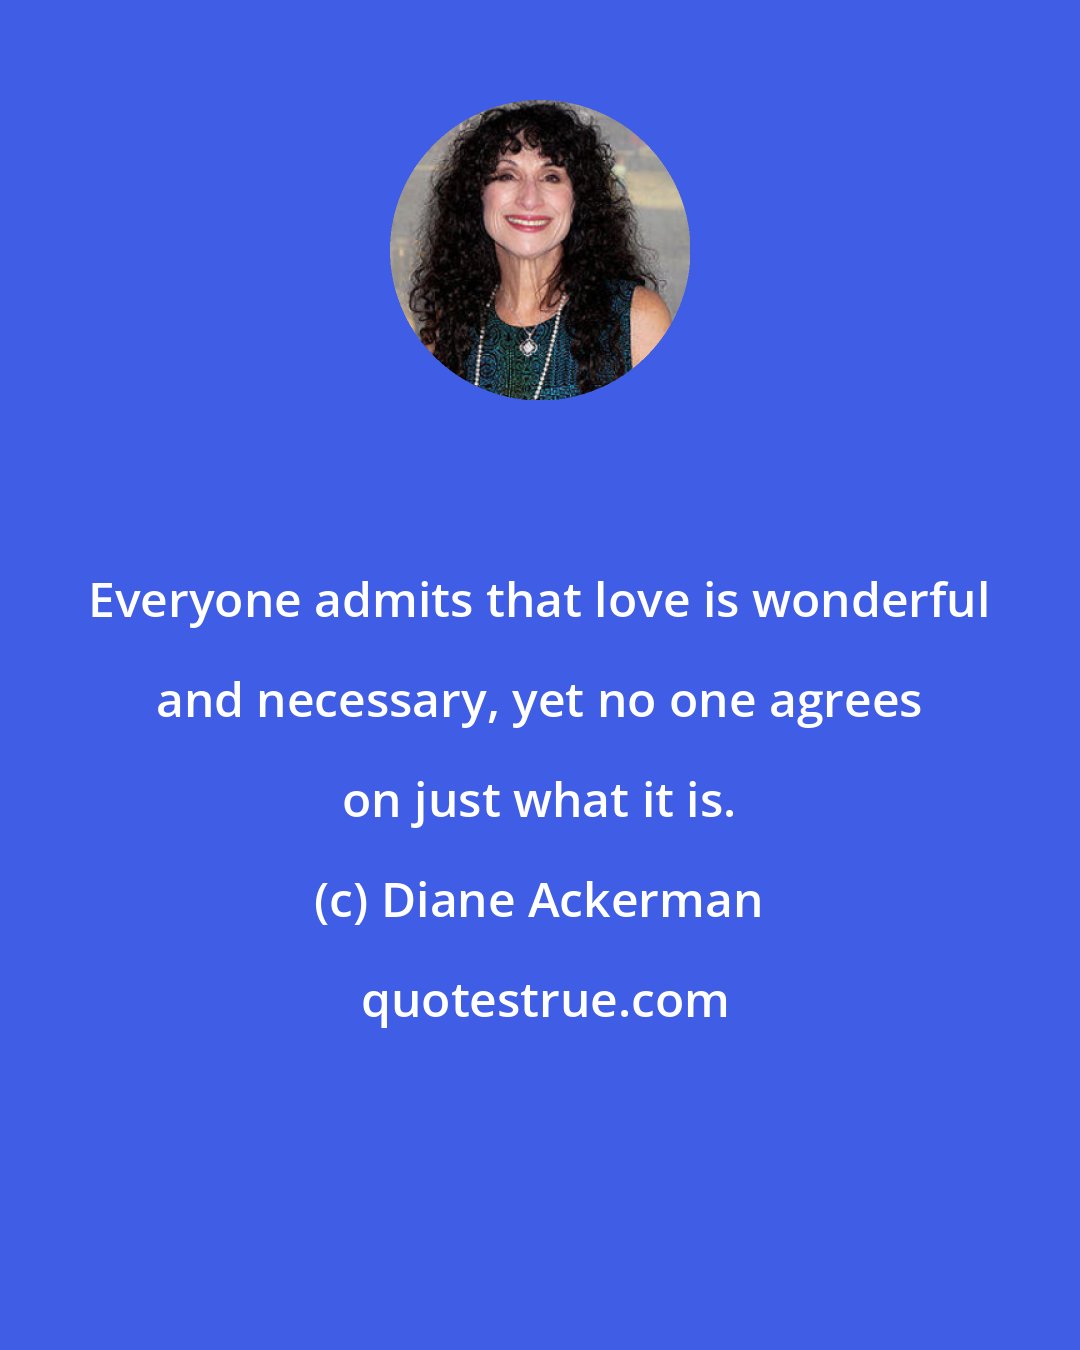 Diane Ackerman: Everyone admits that love is wonderful and necessary, yet no one agrees on just what it is.